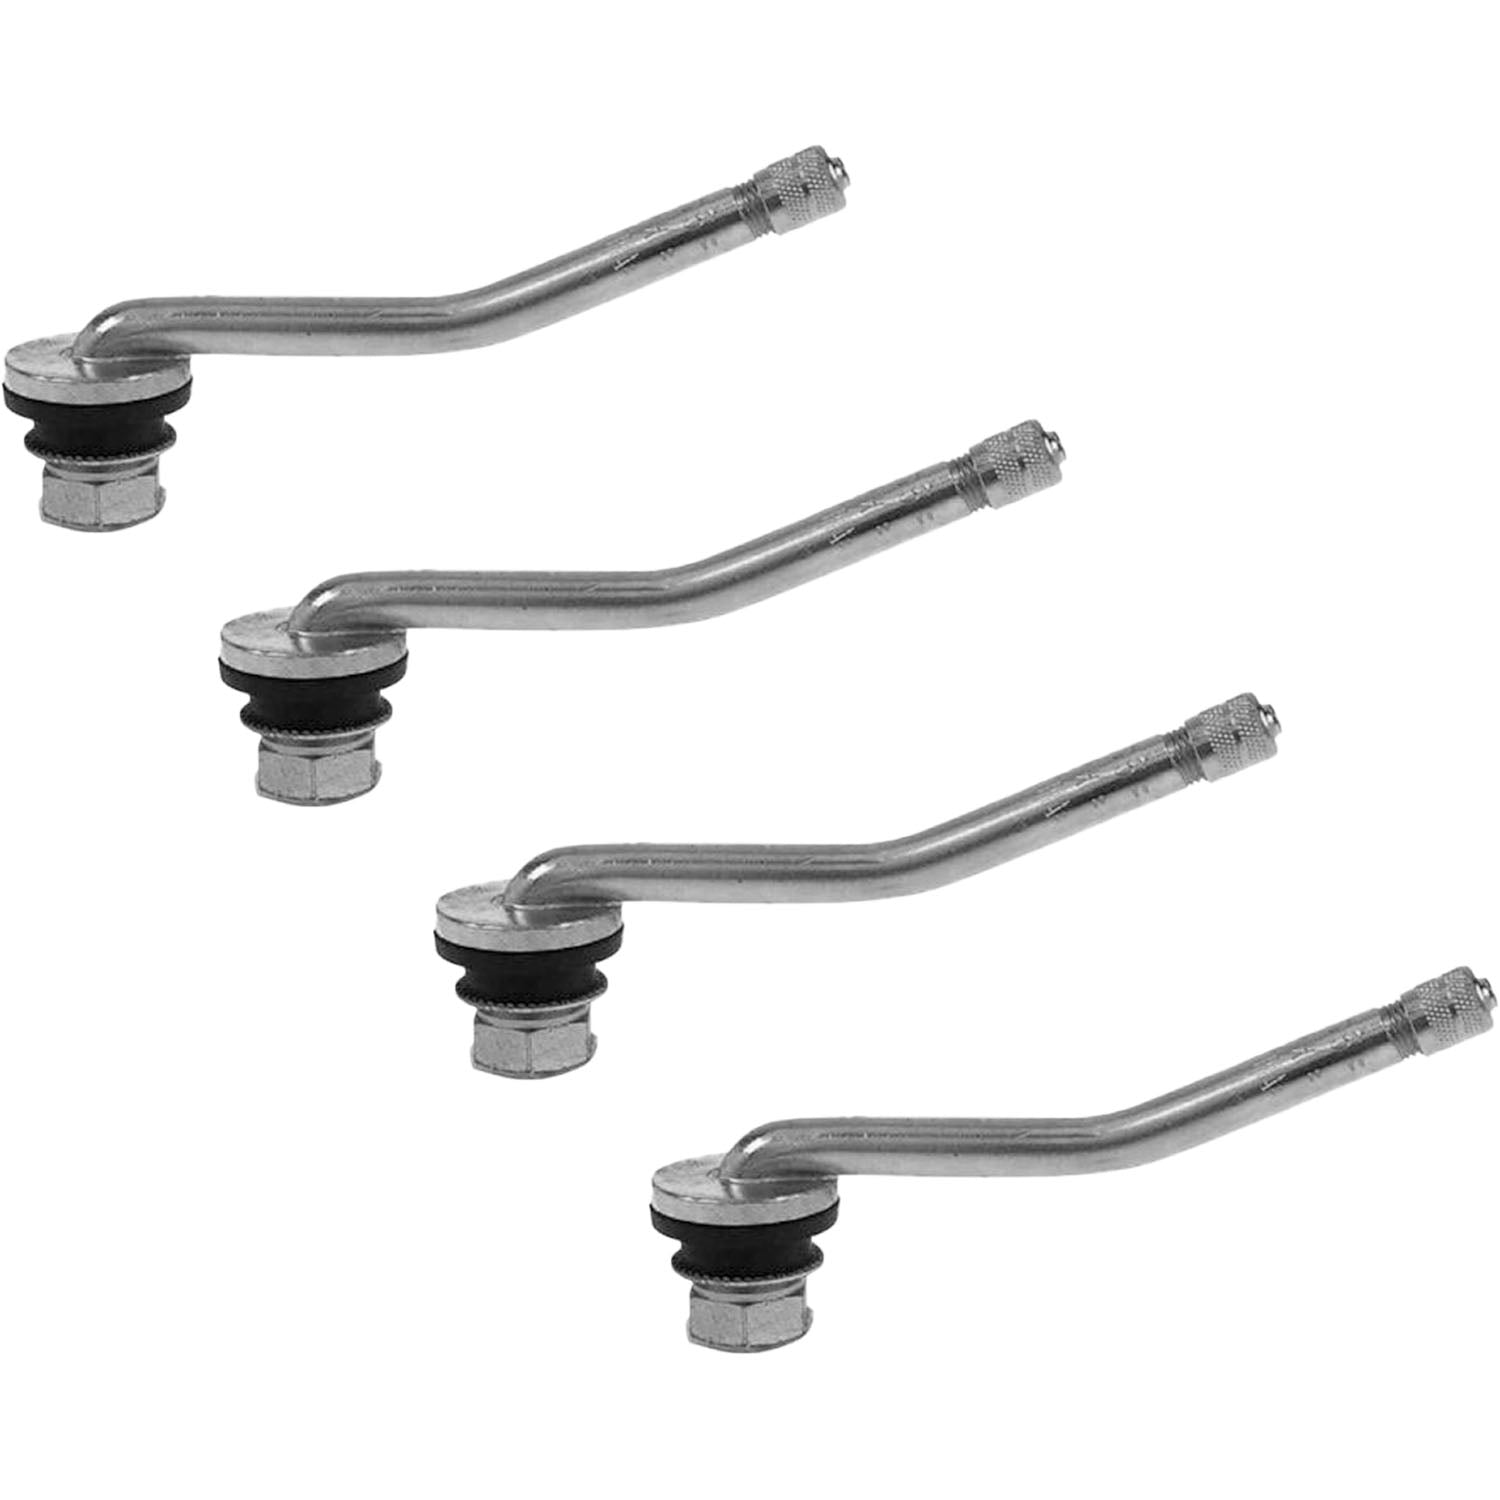 TV515 3-1/4" Double Bend Truck Valve Stem for .625" Valve Holes Pack of 4